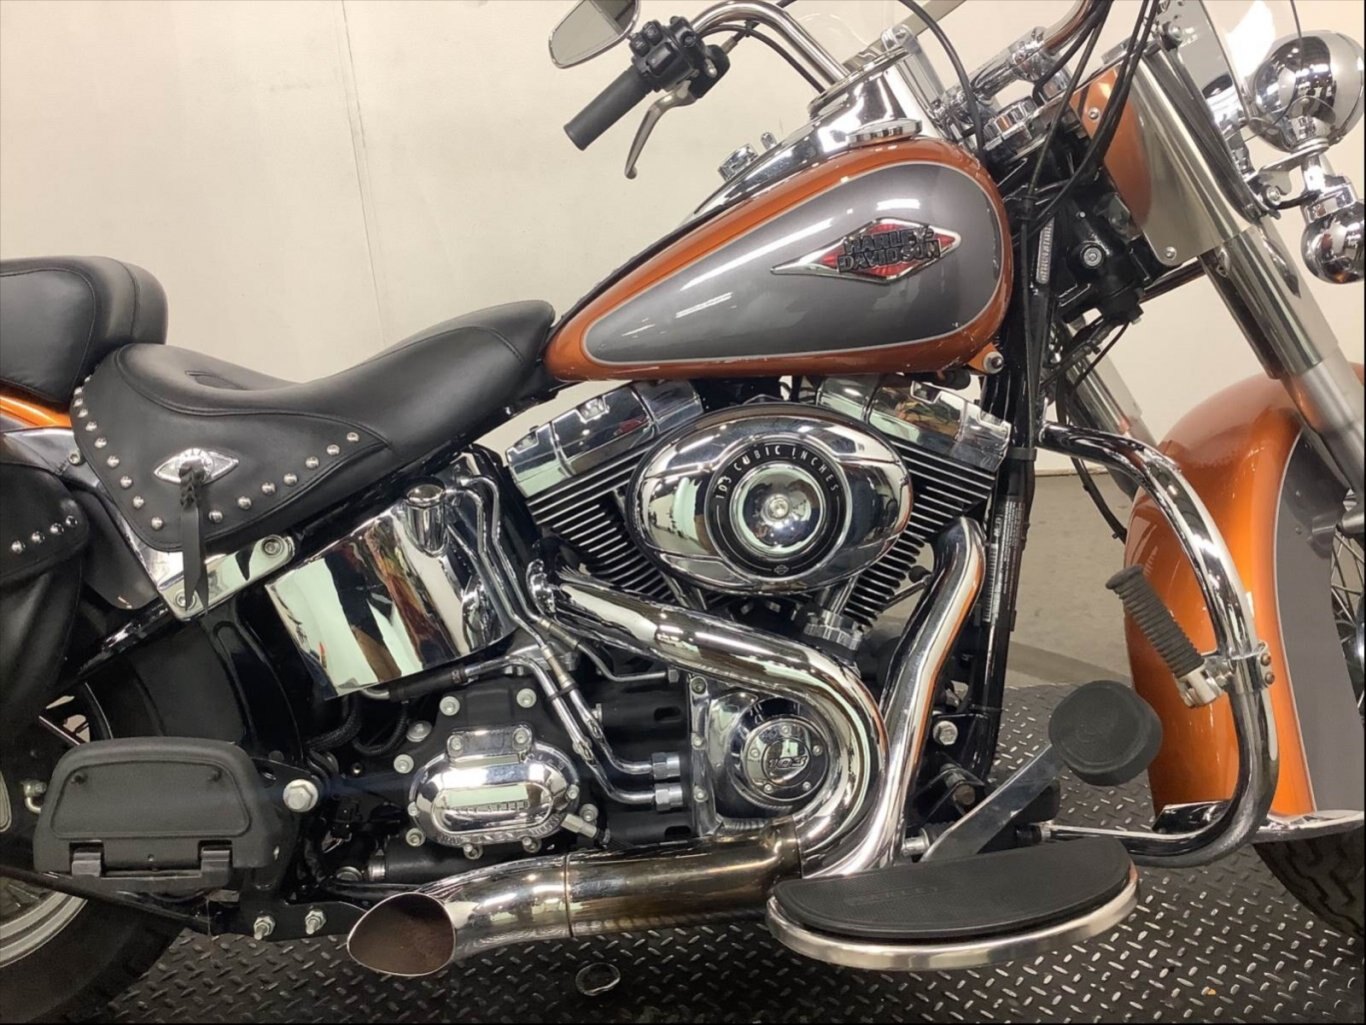 2015 Harley Davidson Heritage Softail Classic SOLD CONGRATULATIONS JIM!!